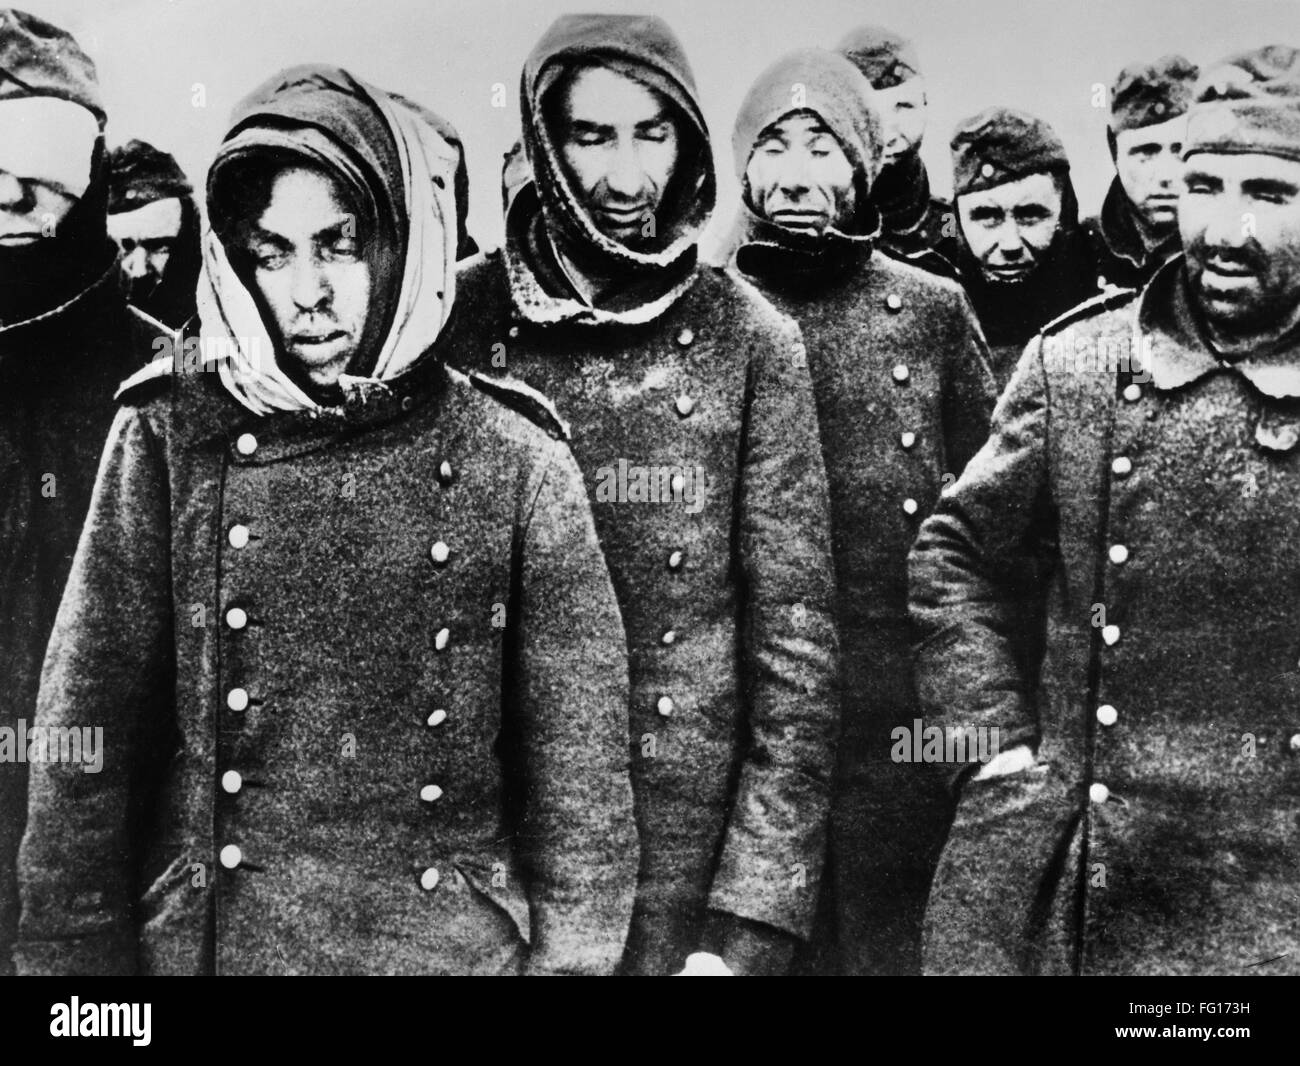 SOVIET UNION: STALINGRAD. /nGerman soldiers at Stalingrad, Soviet Union, after surrendering to Russian forces during World War II. Photographed January/February 1943. Stock Photo